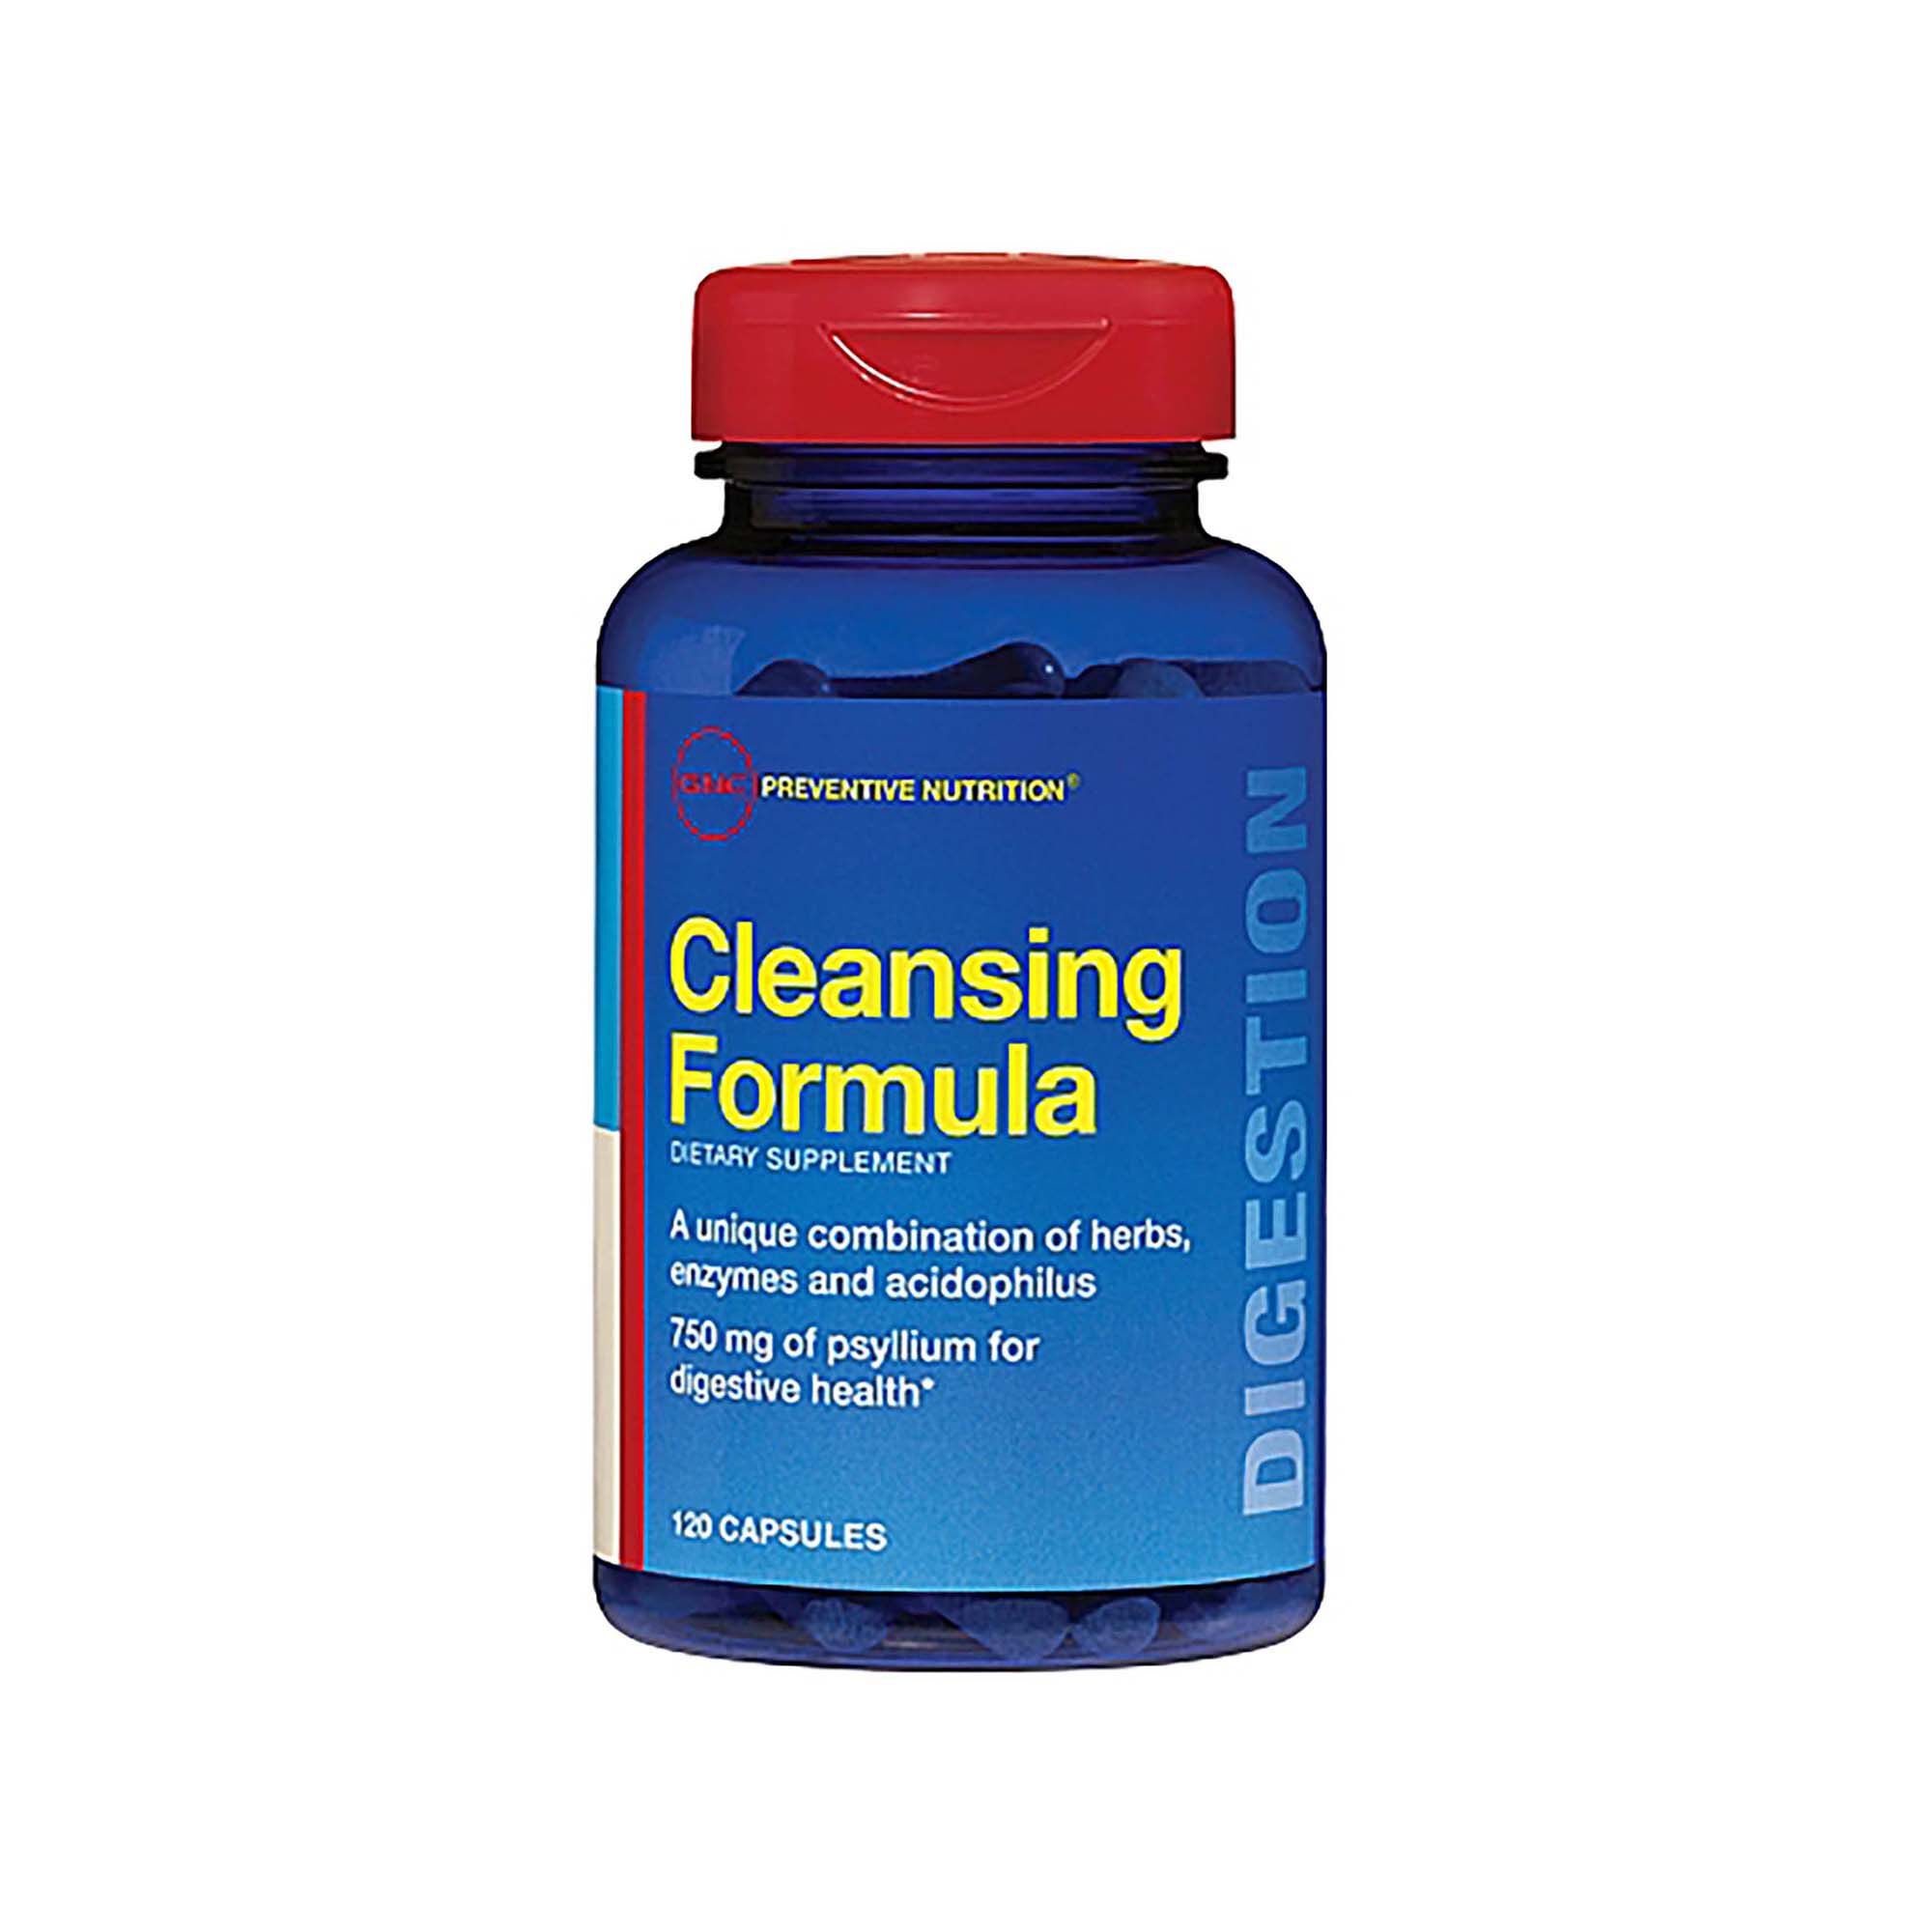 GNC Preventive Nutrition Cleansing Formula California Only. 